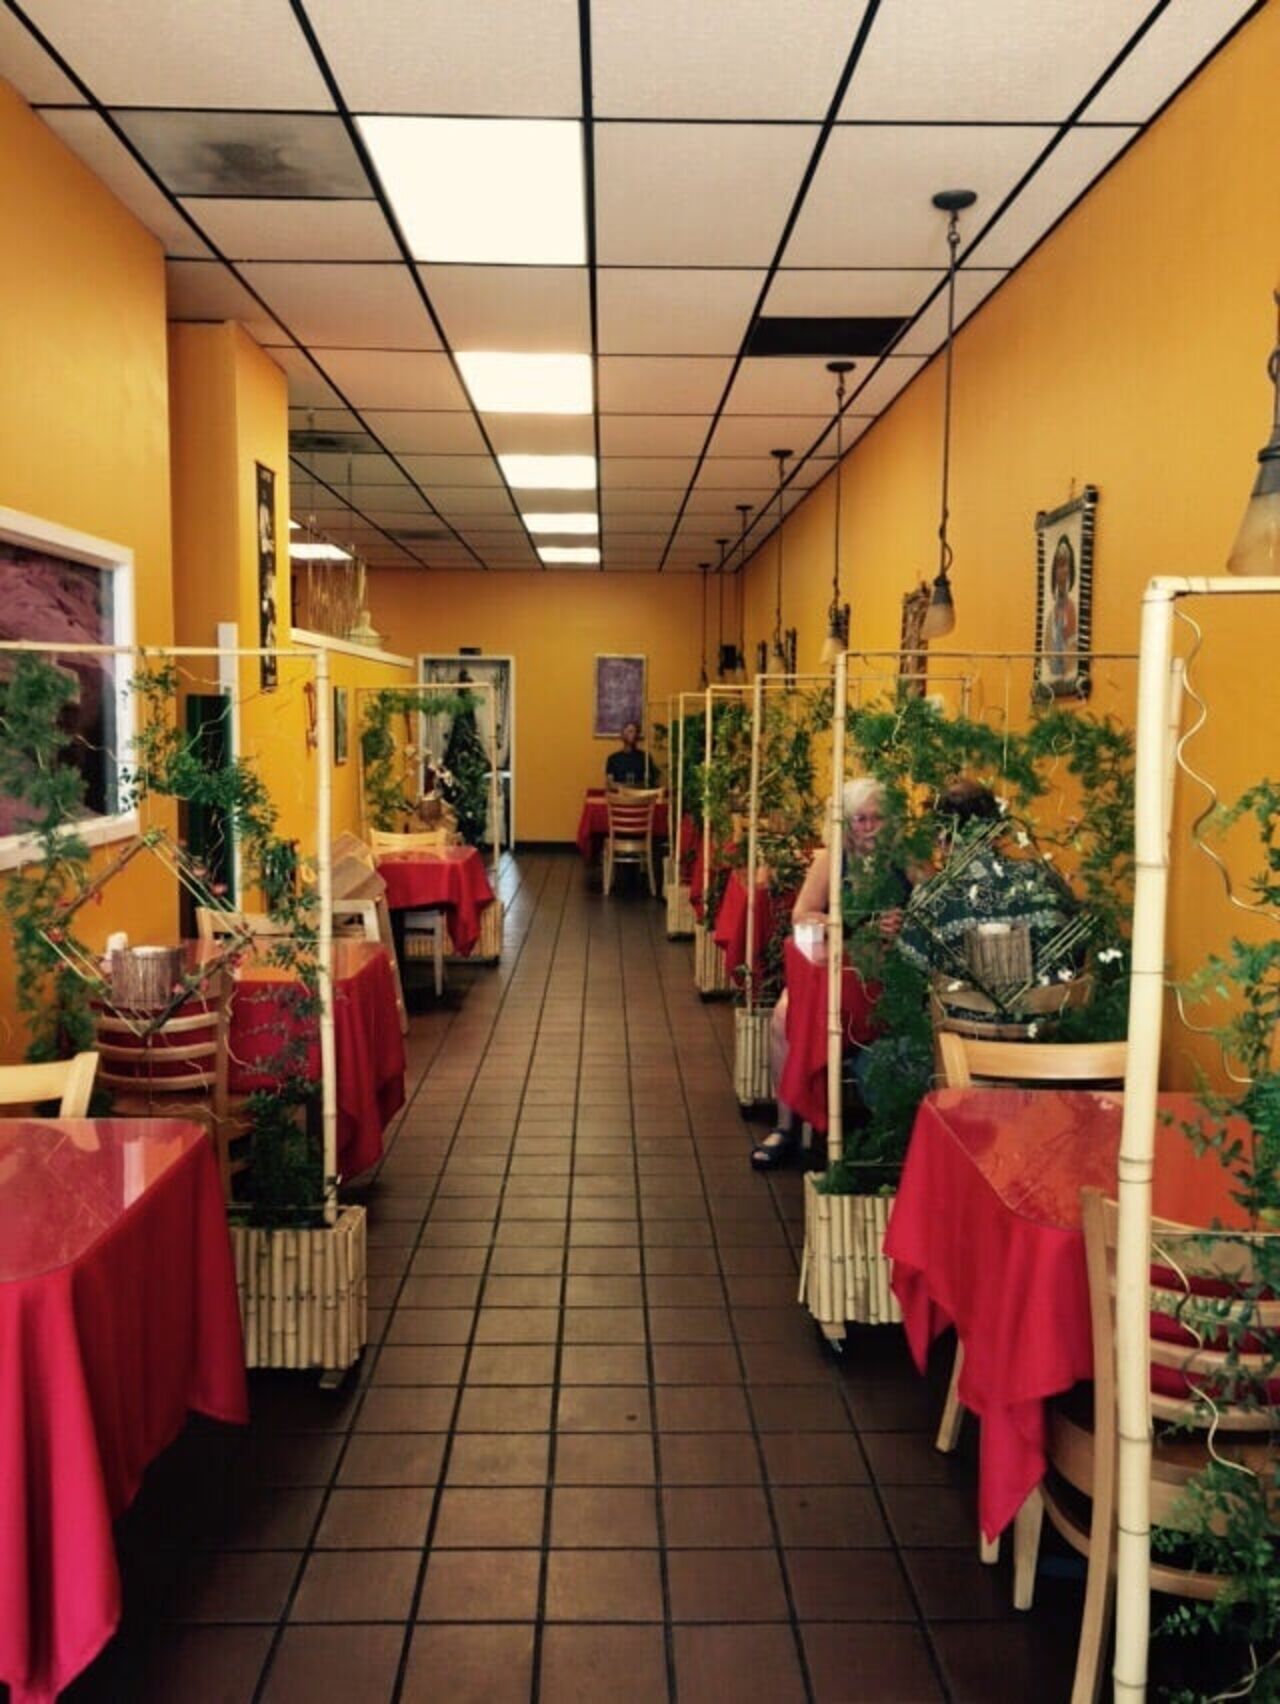 A photo of Abyssinia Restaurant